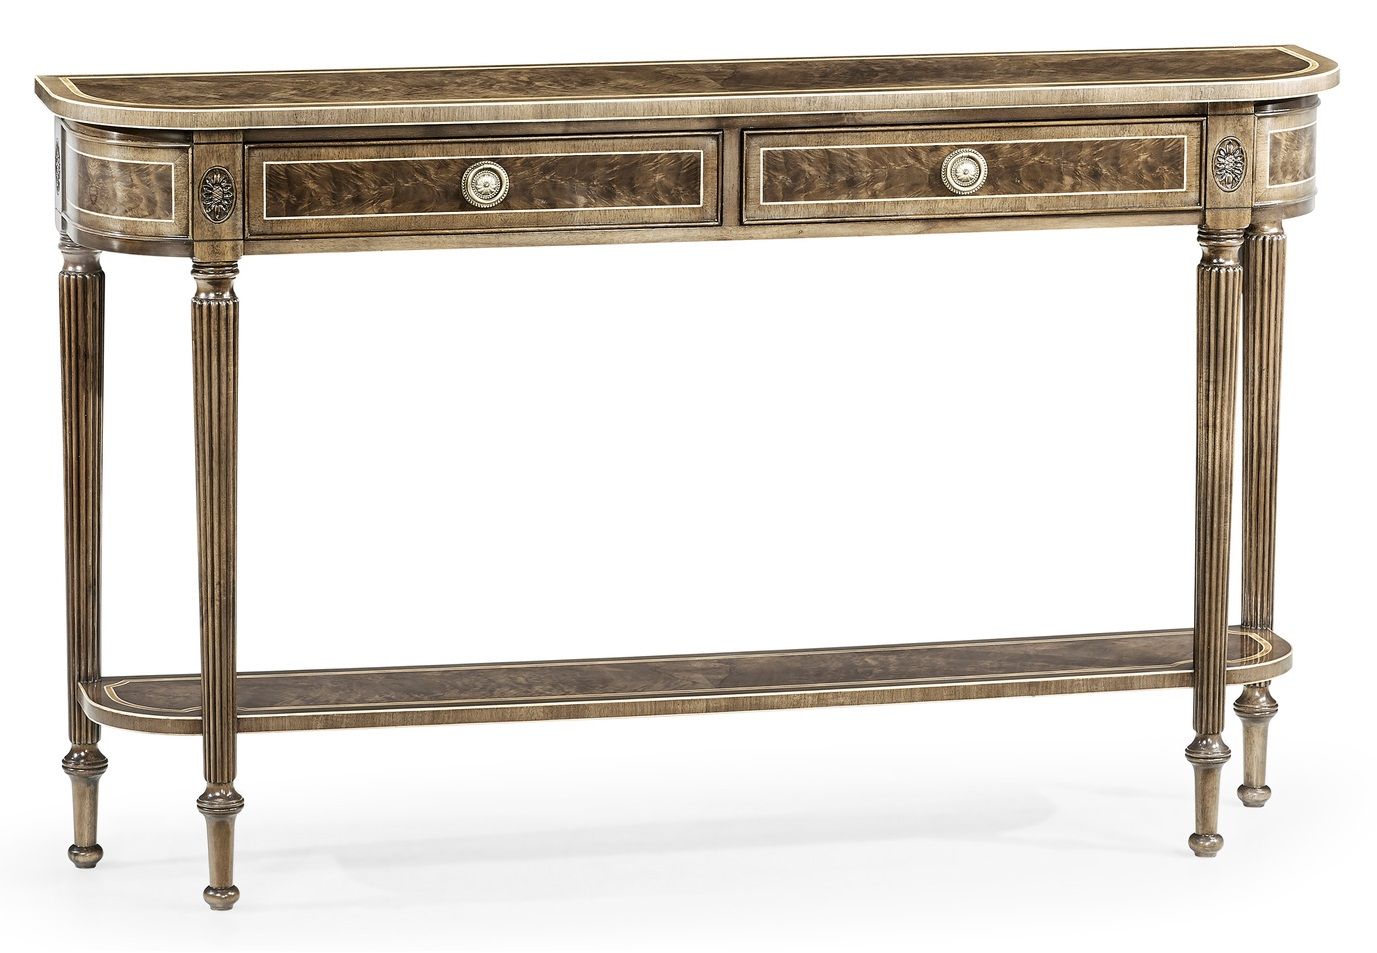 Beautiful bleached wood console table